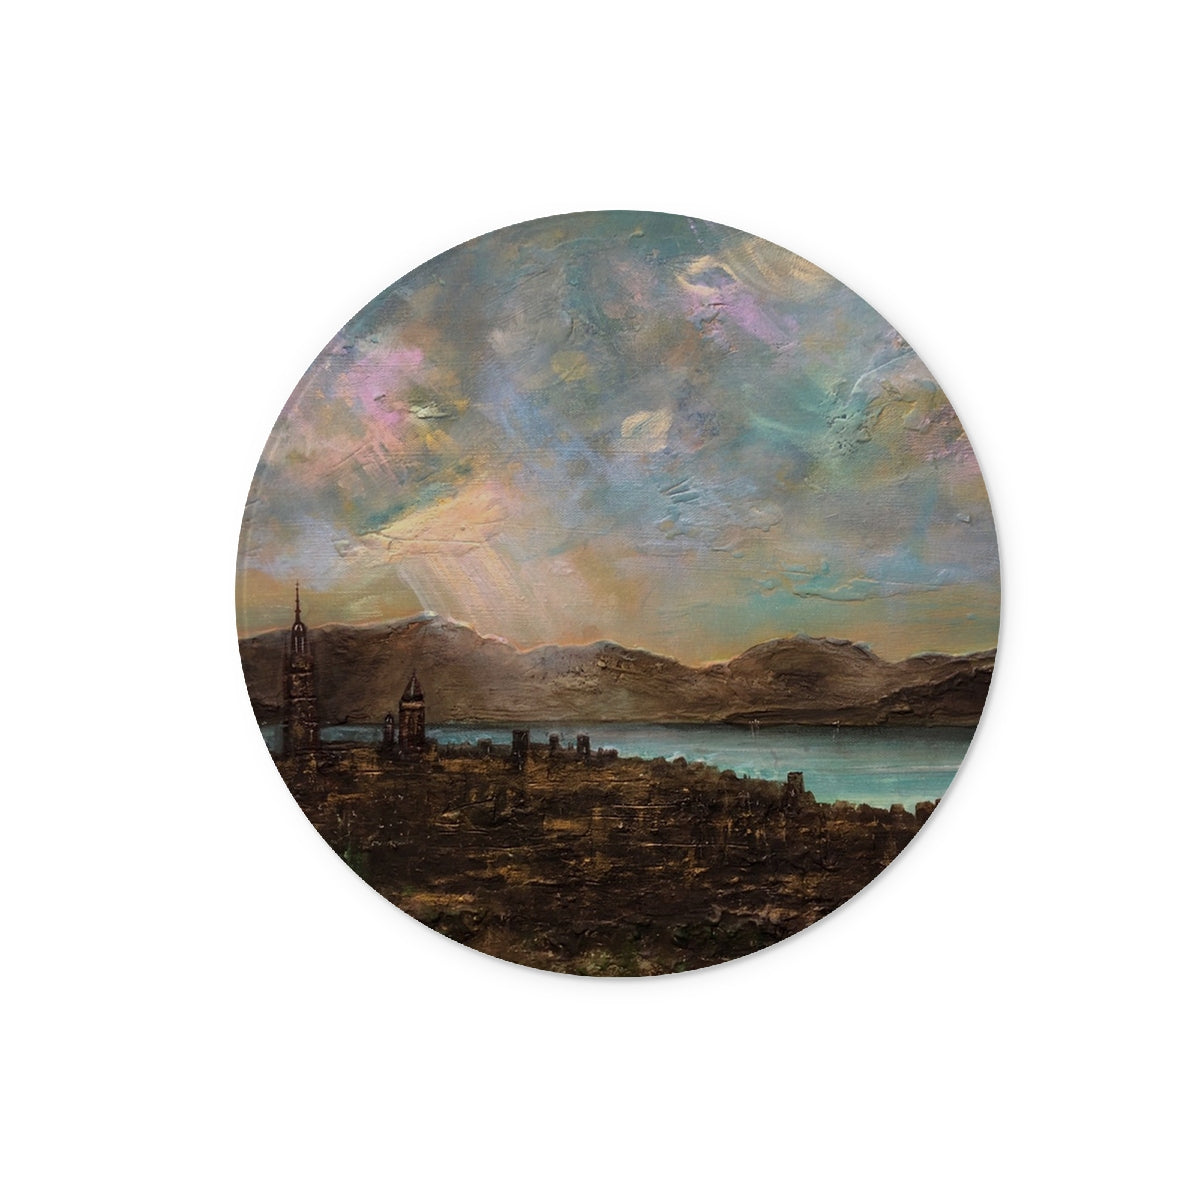 Angels Fingers Over Greenock Art Gifts Glass Chopping Board-Glass Chopping Boards-River Clyde Art Gallery-12" Round-Paintings, Prints, Homeware, Art Gifts From Scotland By Scottish Artist Kevin Hunter